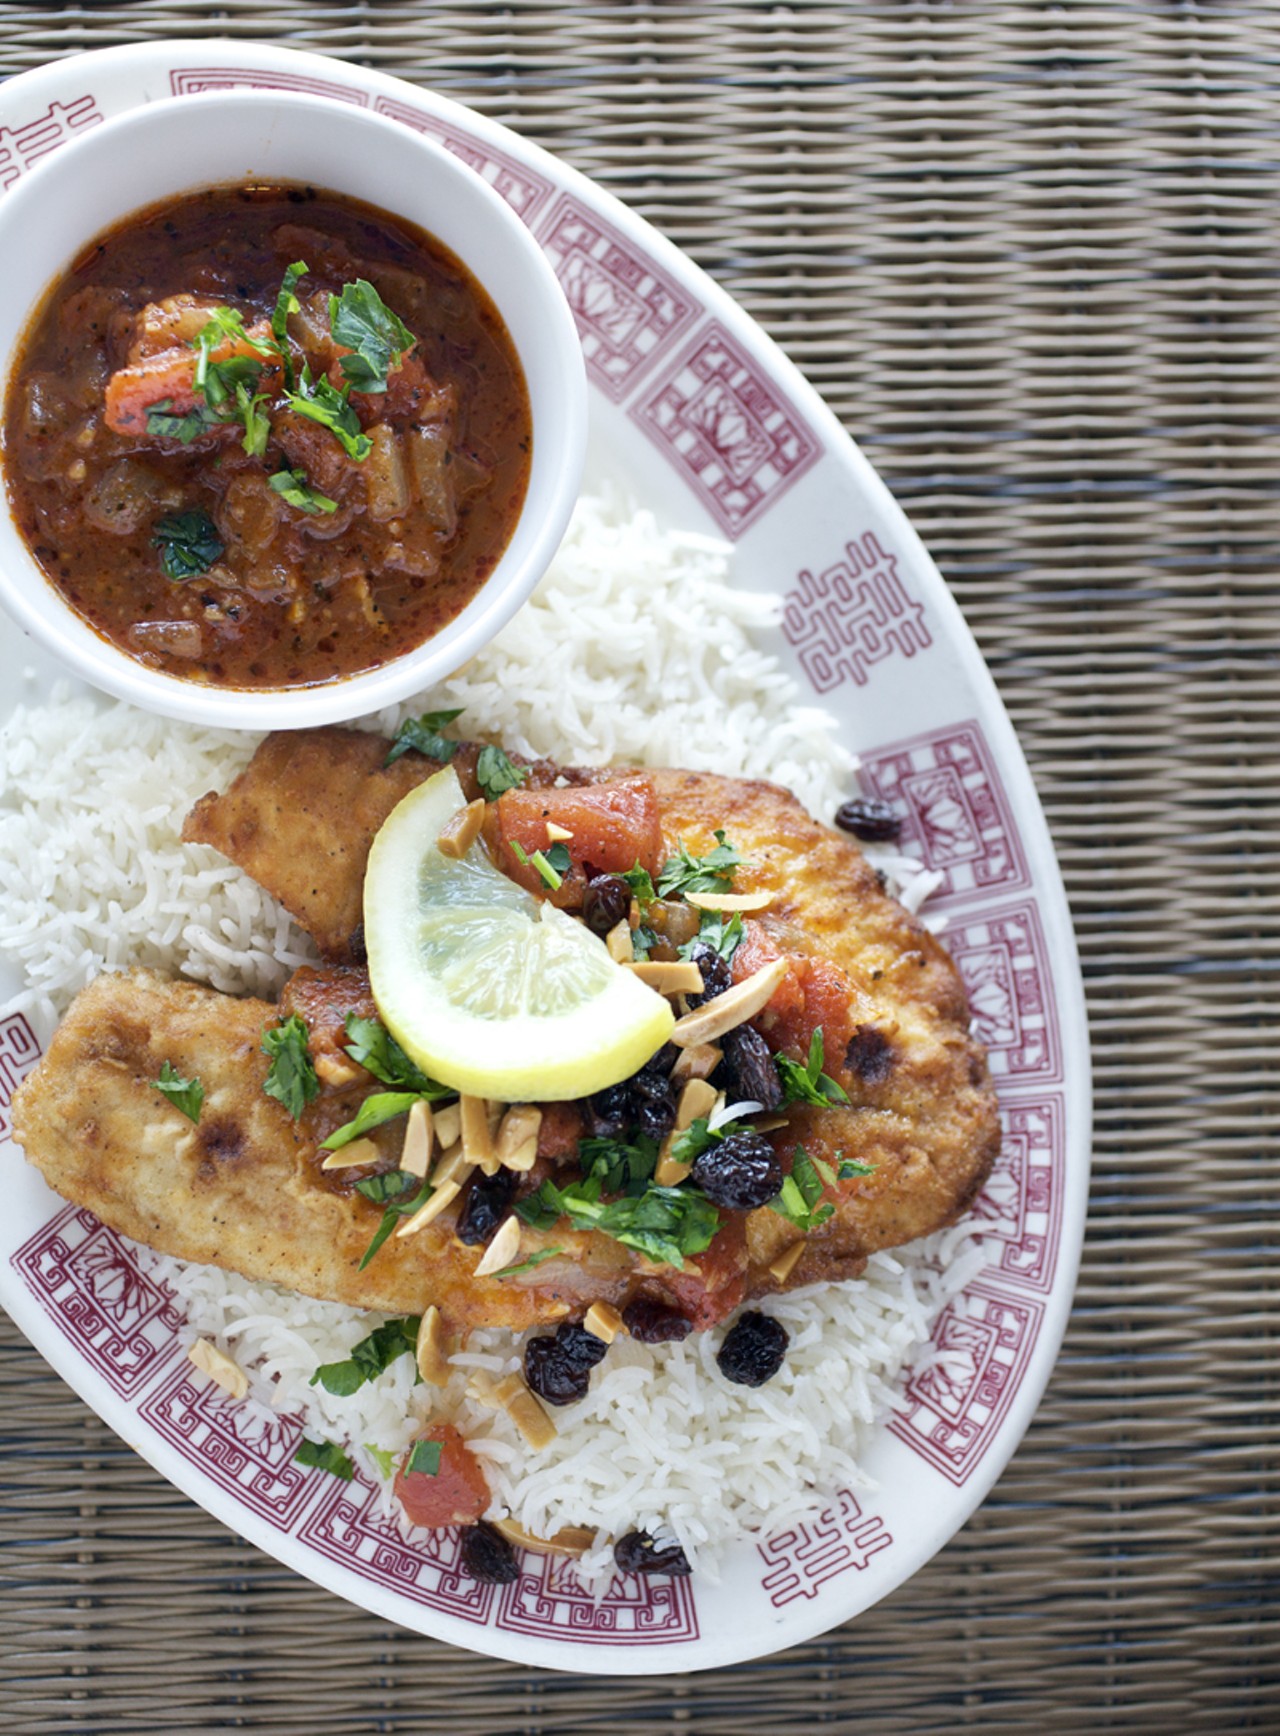 The Bedouin Fish is Tilapia served with a side of tomato sauce that is made from garlic, ginger, onion, chili peppers and mint. And is served with Basmati rice mixed with raisins, mint, parsley and crushed almonds.